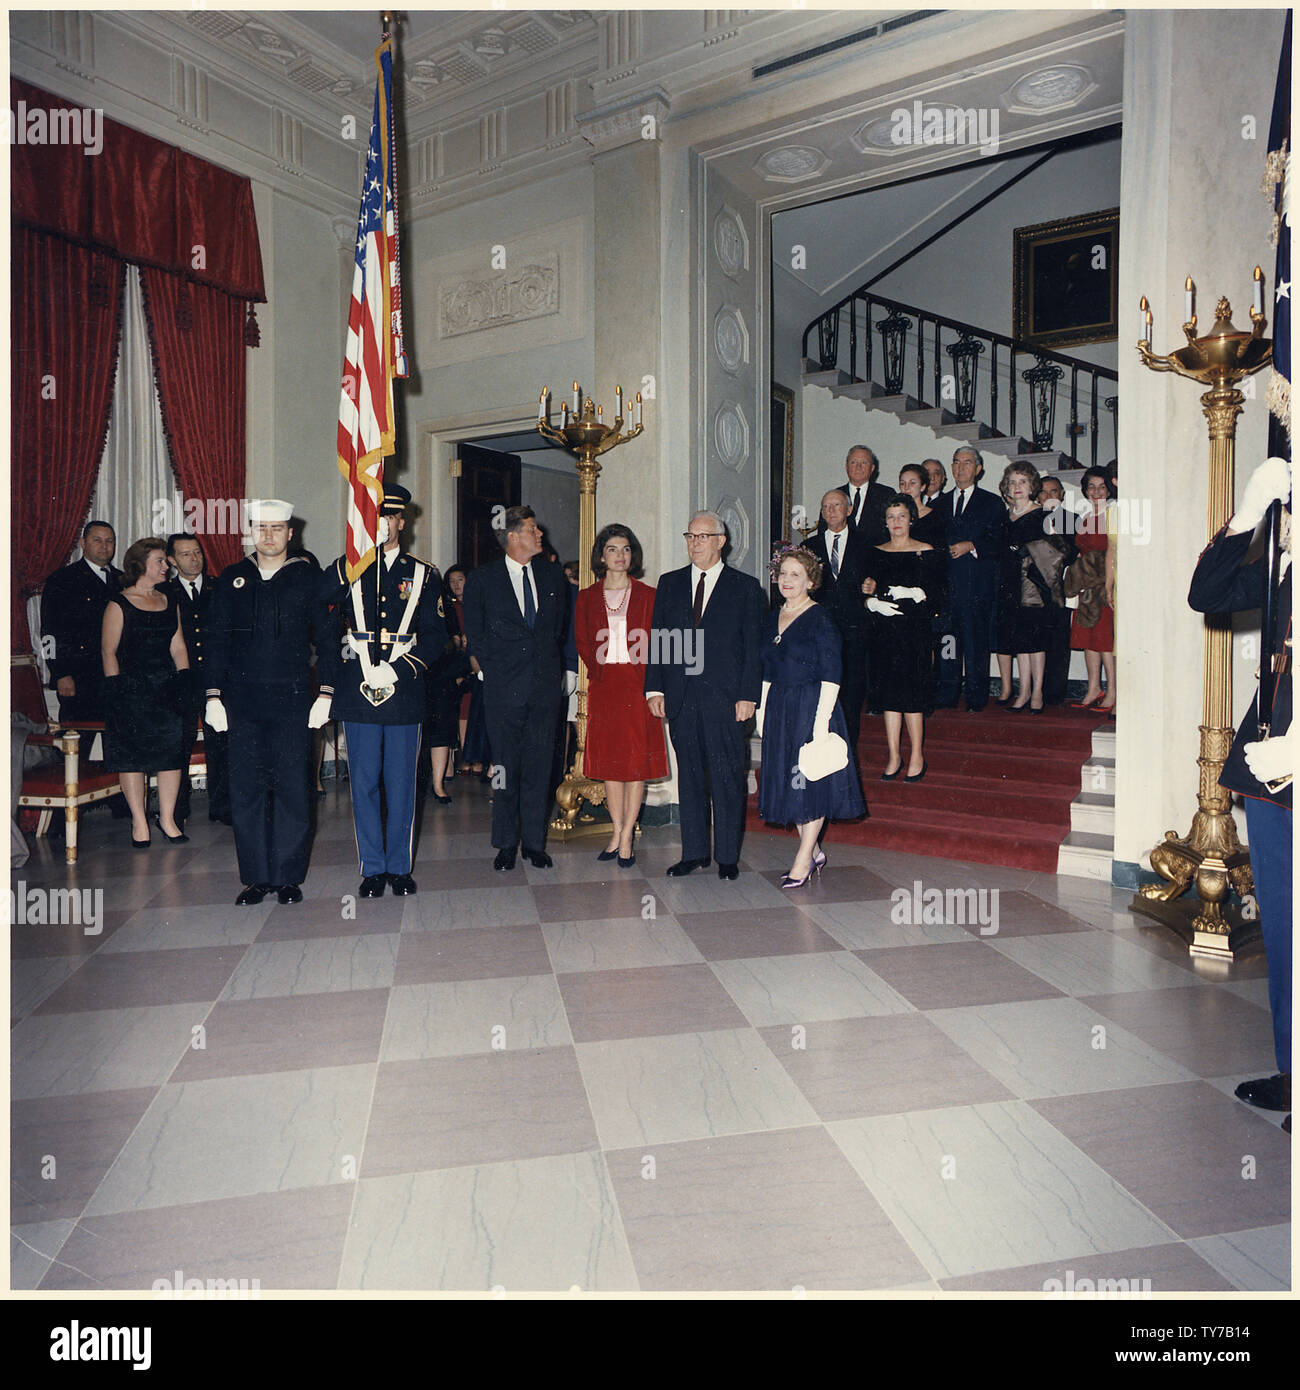 Judicial Reception. Color Guard, President Kennedy, Mrs. Kennedy, Chief Justice of the Supreme Court Earl Warren, Mrs. Warren, Associate Justice Hugo Black, Mrs. Black, Associate Justice William O. Douglas, Mrs. Douglas, Associate Justice Thomas Campbell Clark, Mrs. Clark, Associate Justice Potter Stewart, Mrs. Stewart, others. White House, Grand Staircase. Stock Photo